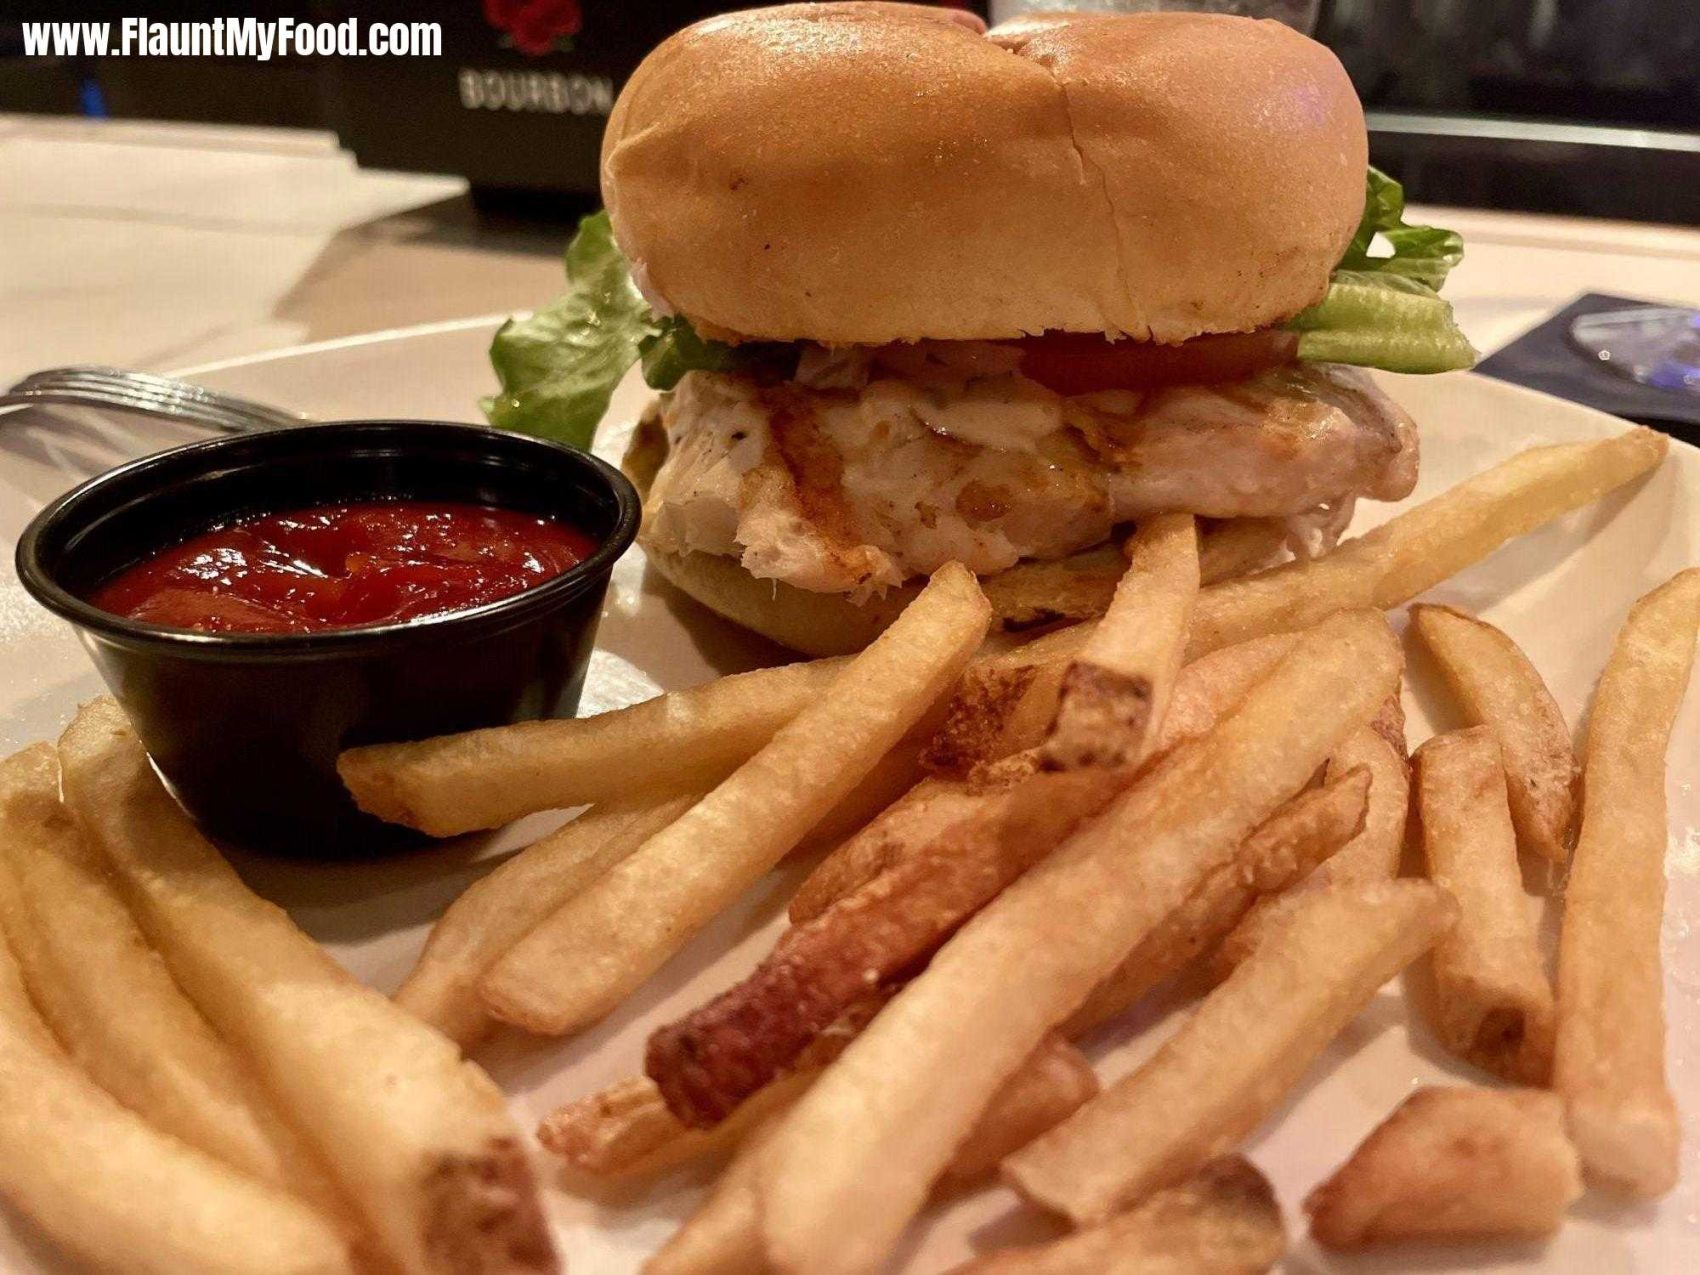 Grilled Grouper sandwich with fries at the dry dock Grill on longboat key island in FloridaGrilled Grouper sandwich with fries at the dry dock Grill on longboat key island in Florida